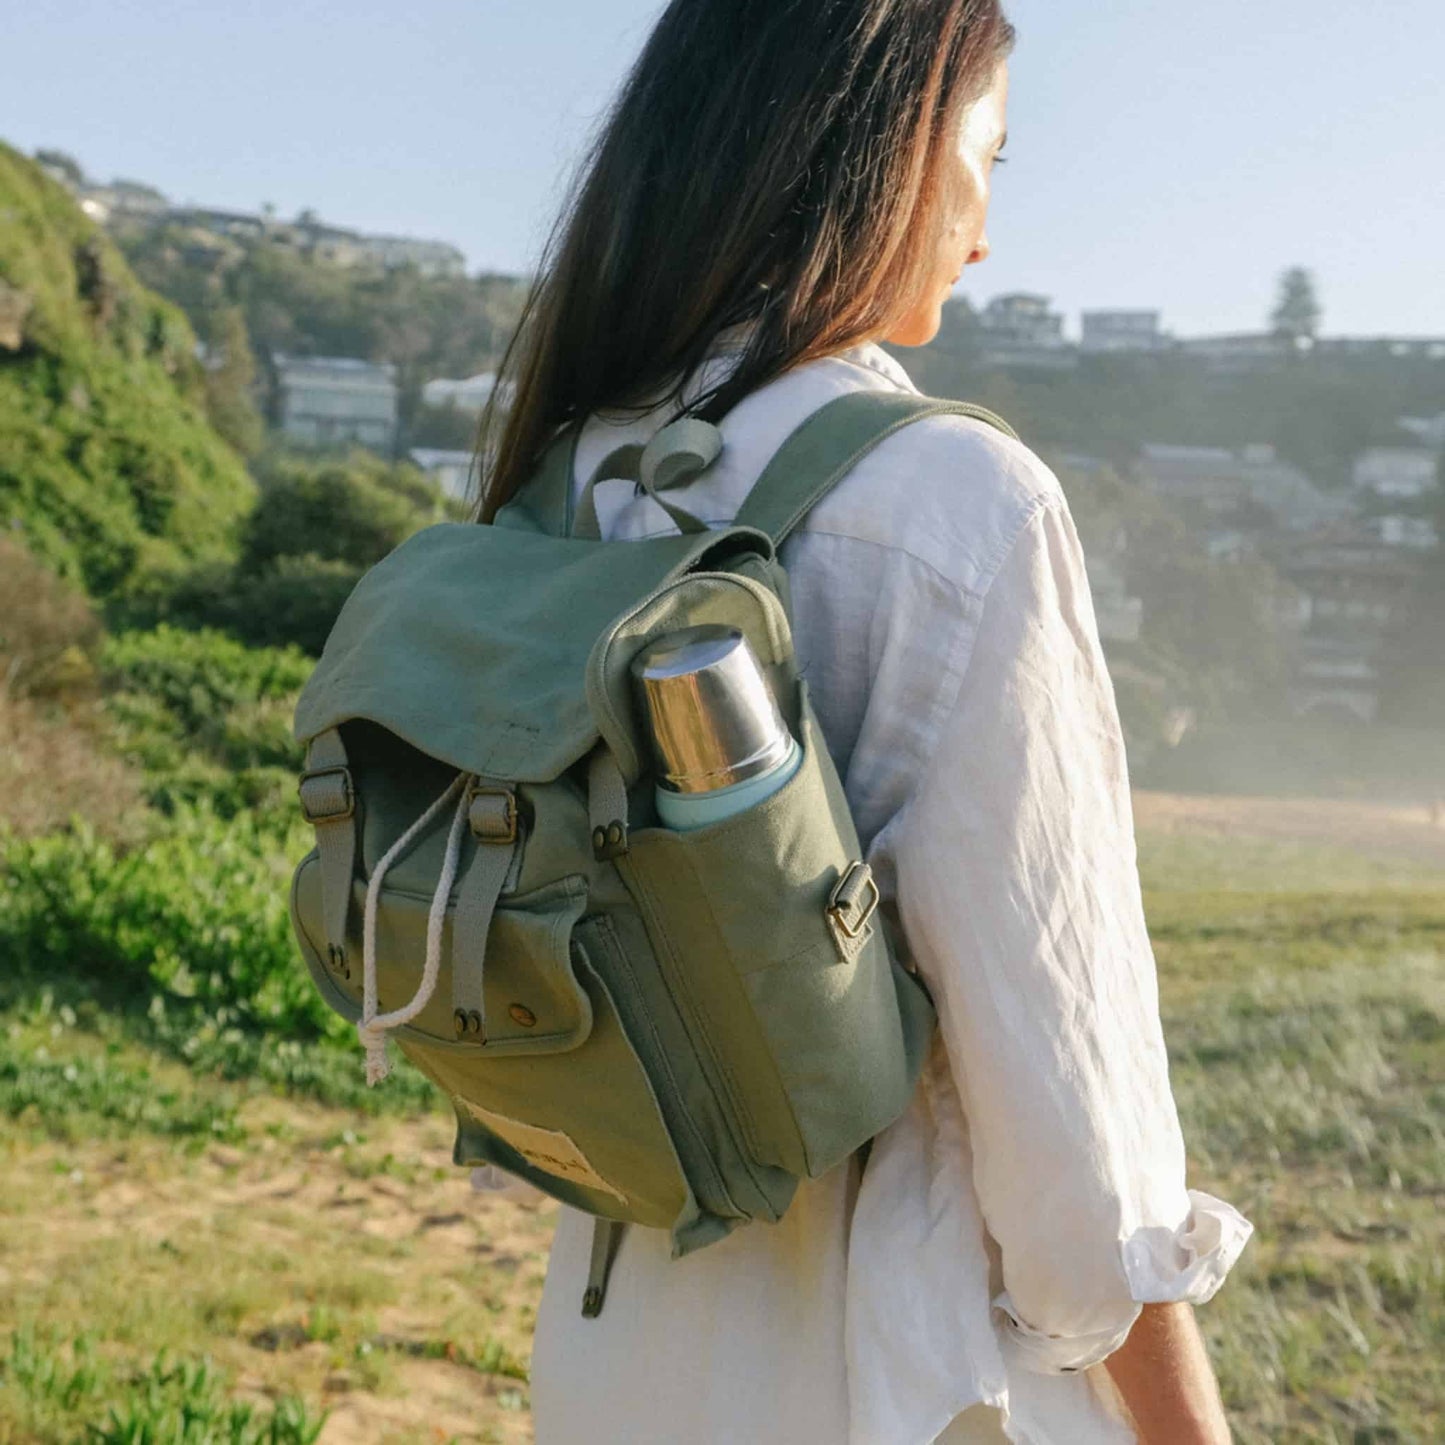 SOL SATCHEL Recycled Canvas BACKPACKS - three colour ways (IMPERFECTS)